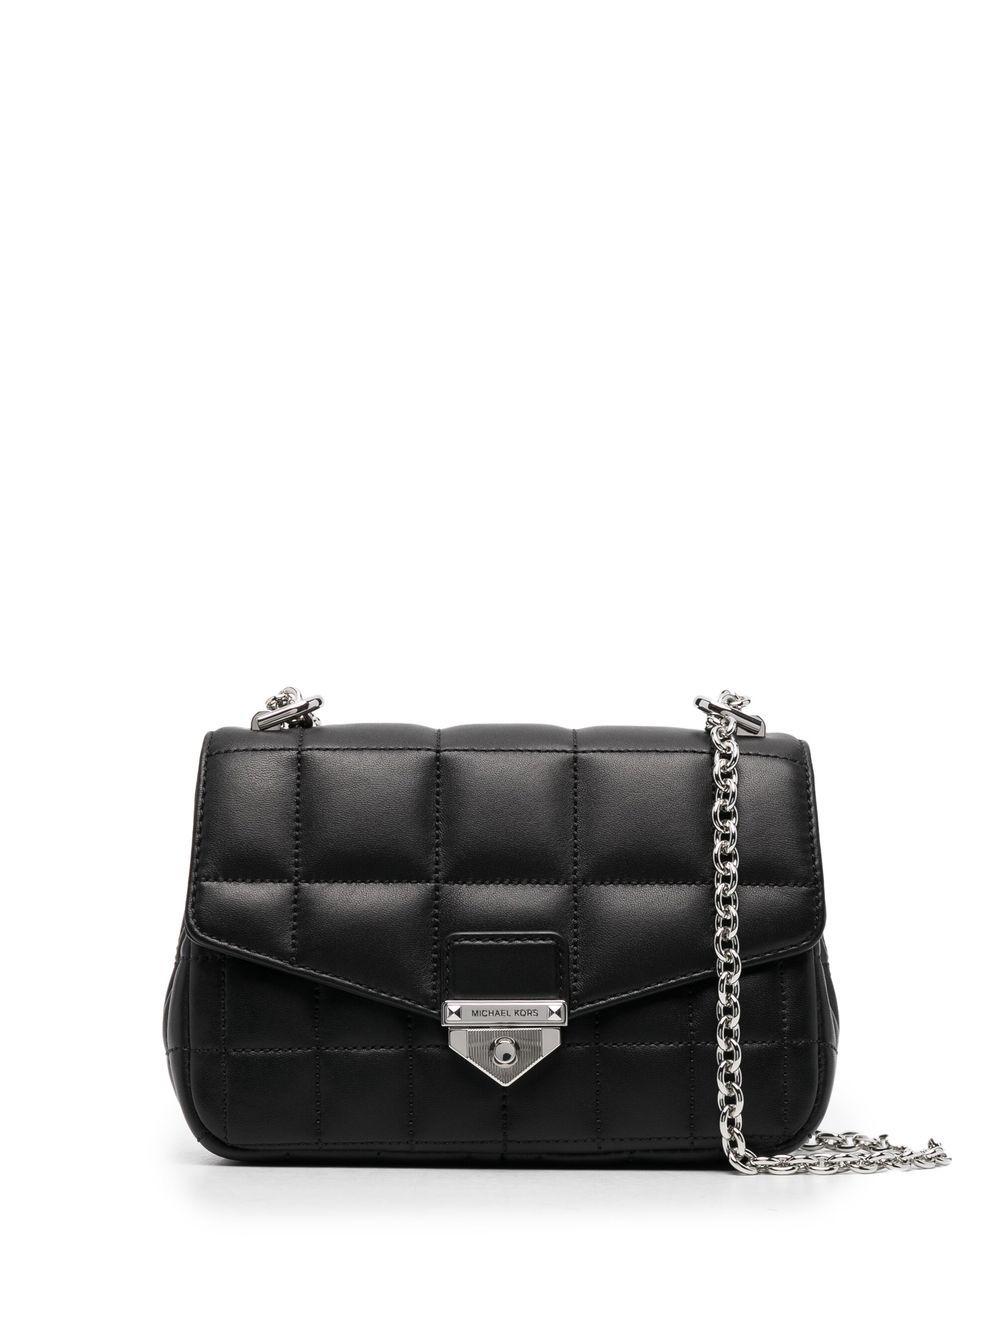 MICHAEL Michael Kors Soho Quilted Chain Shoulder Bag in Black | Lyst